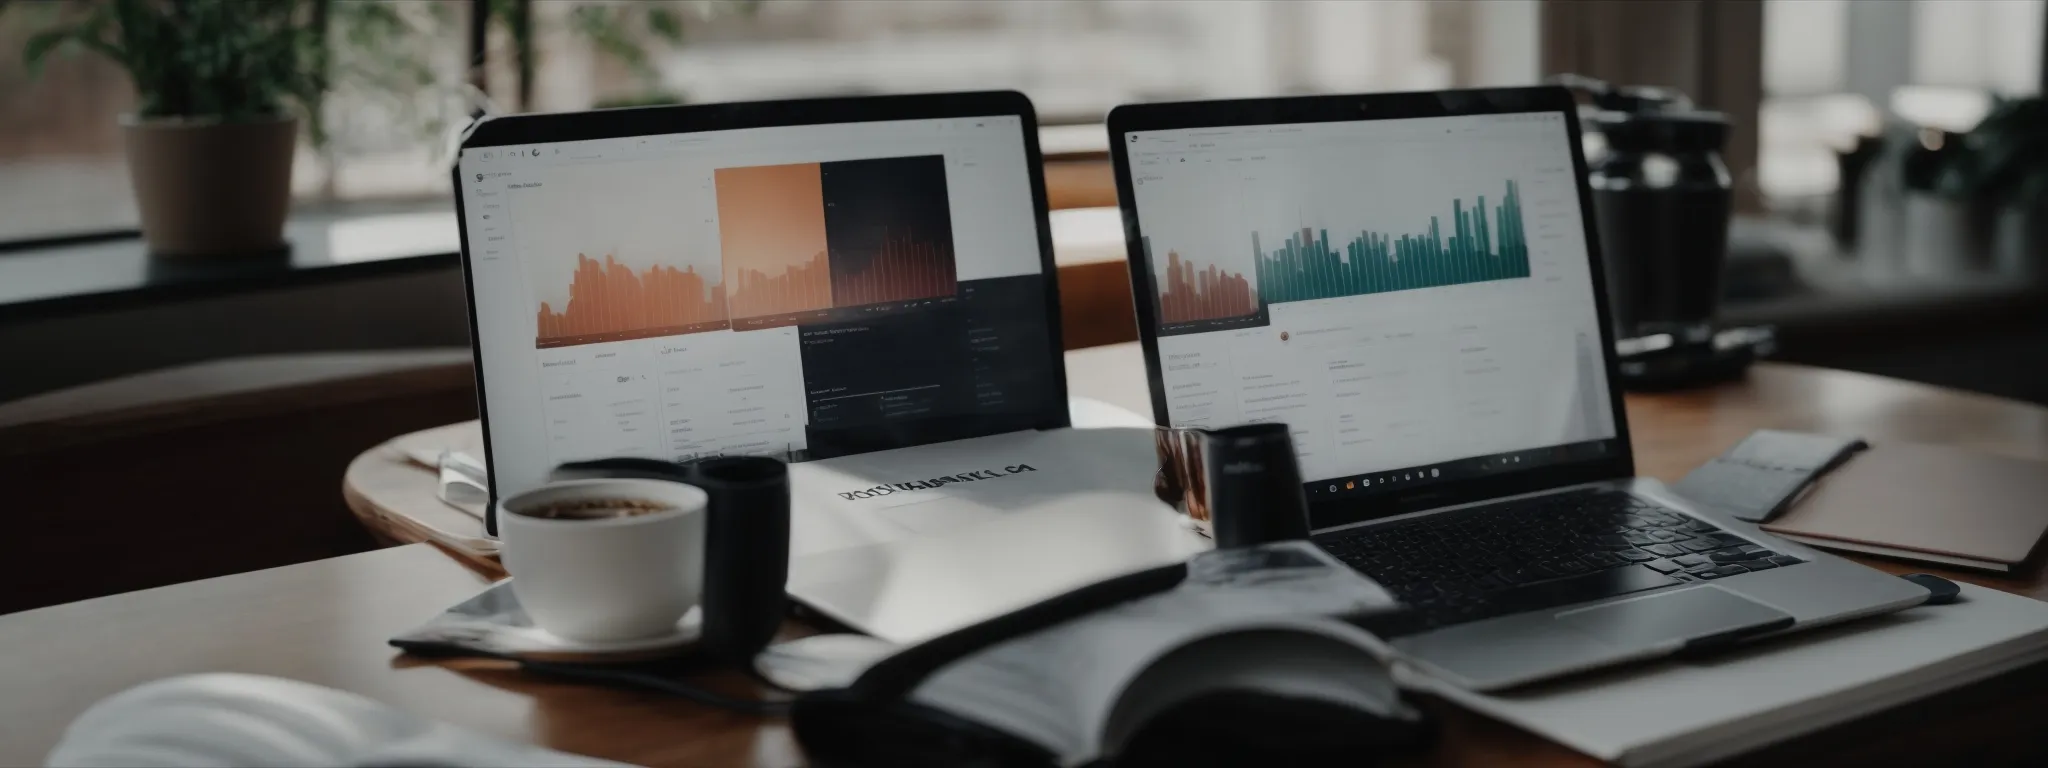 a laptop open to an analytics dashboard, set on a desk next to a cup of coffee and a pair of glasses.